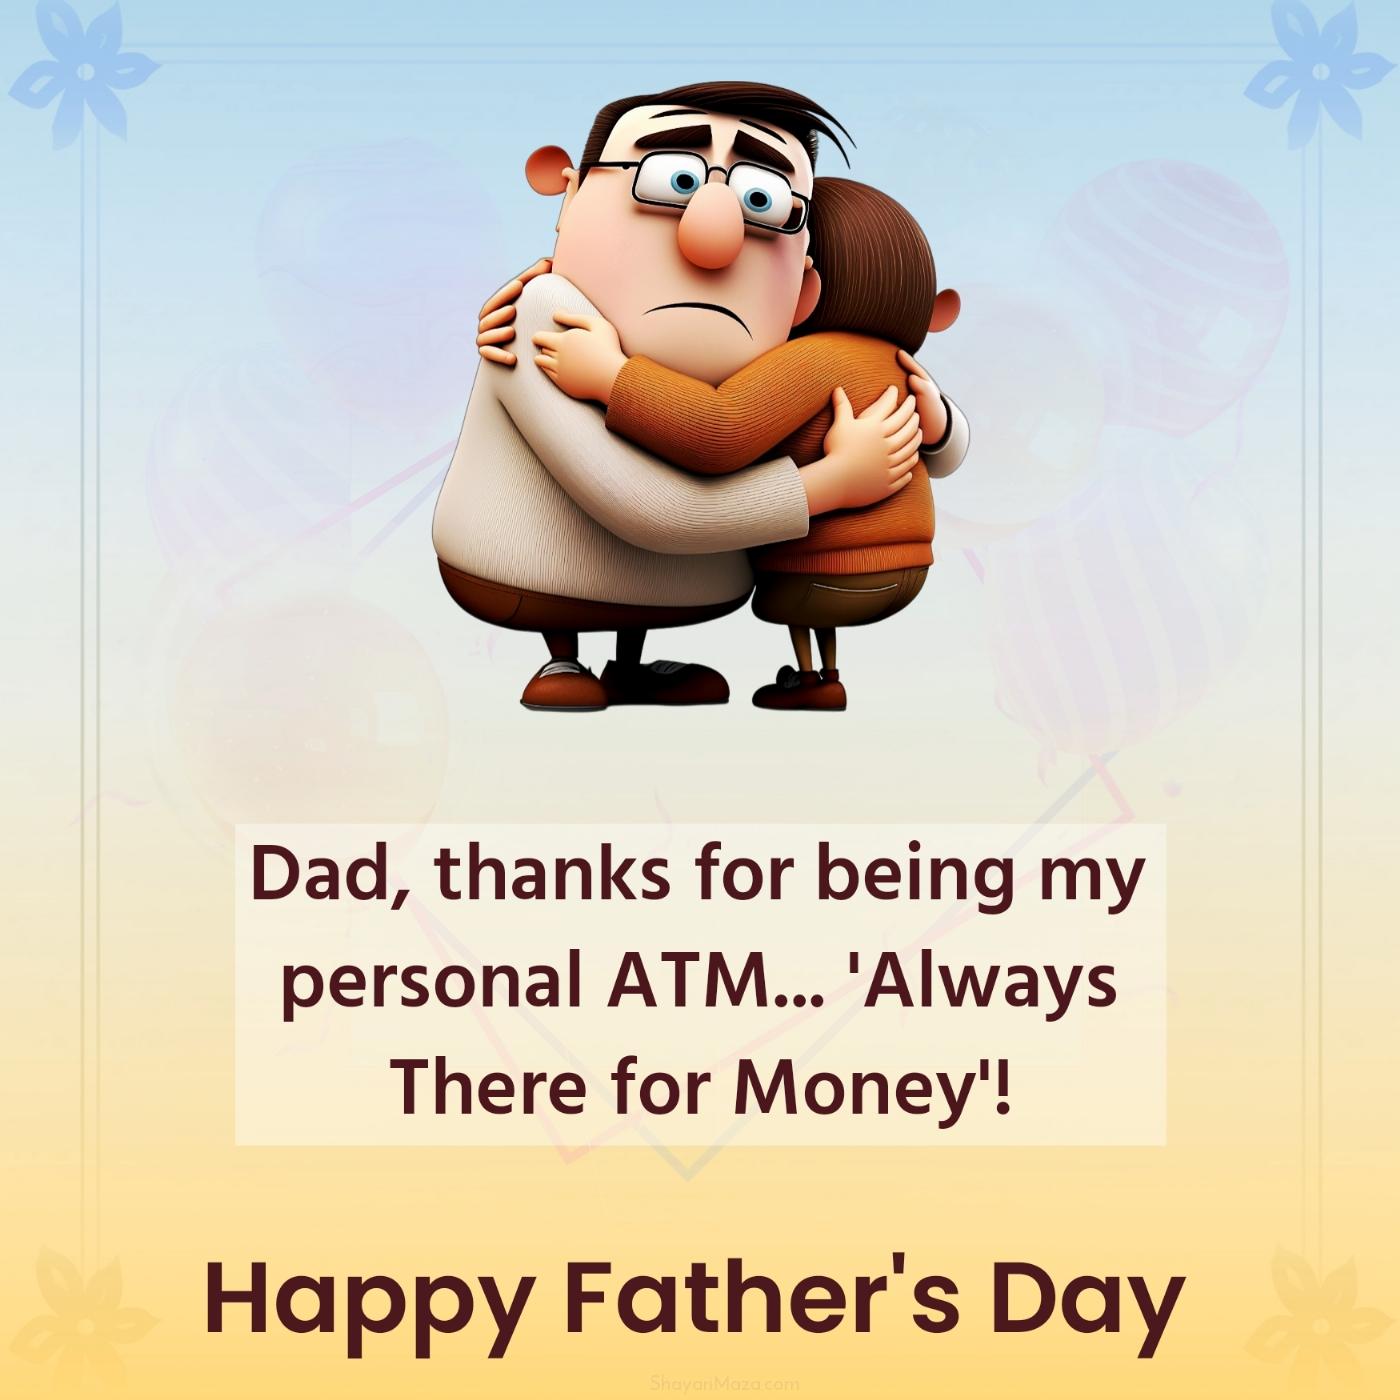 Dad thanks for being my personal ATM